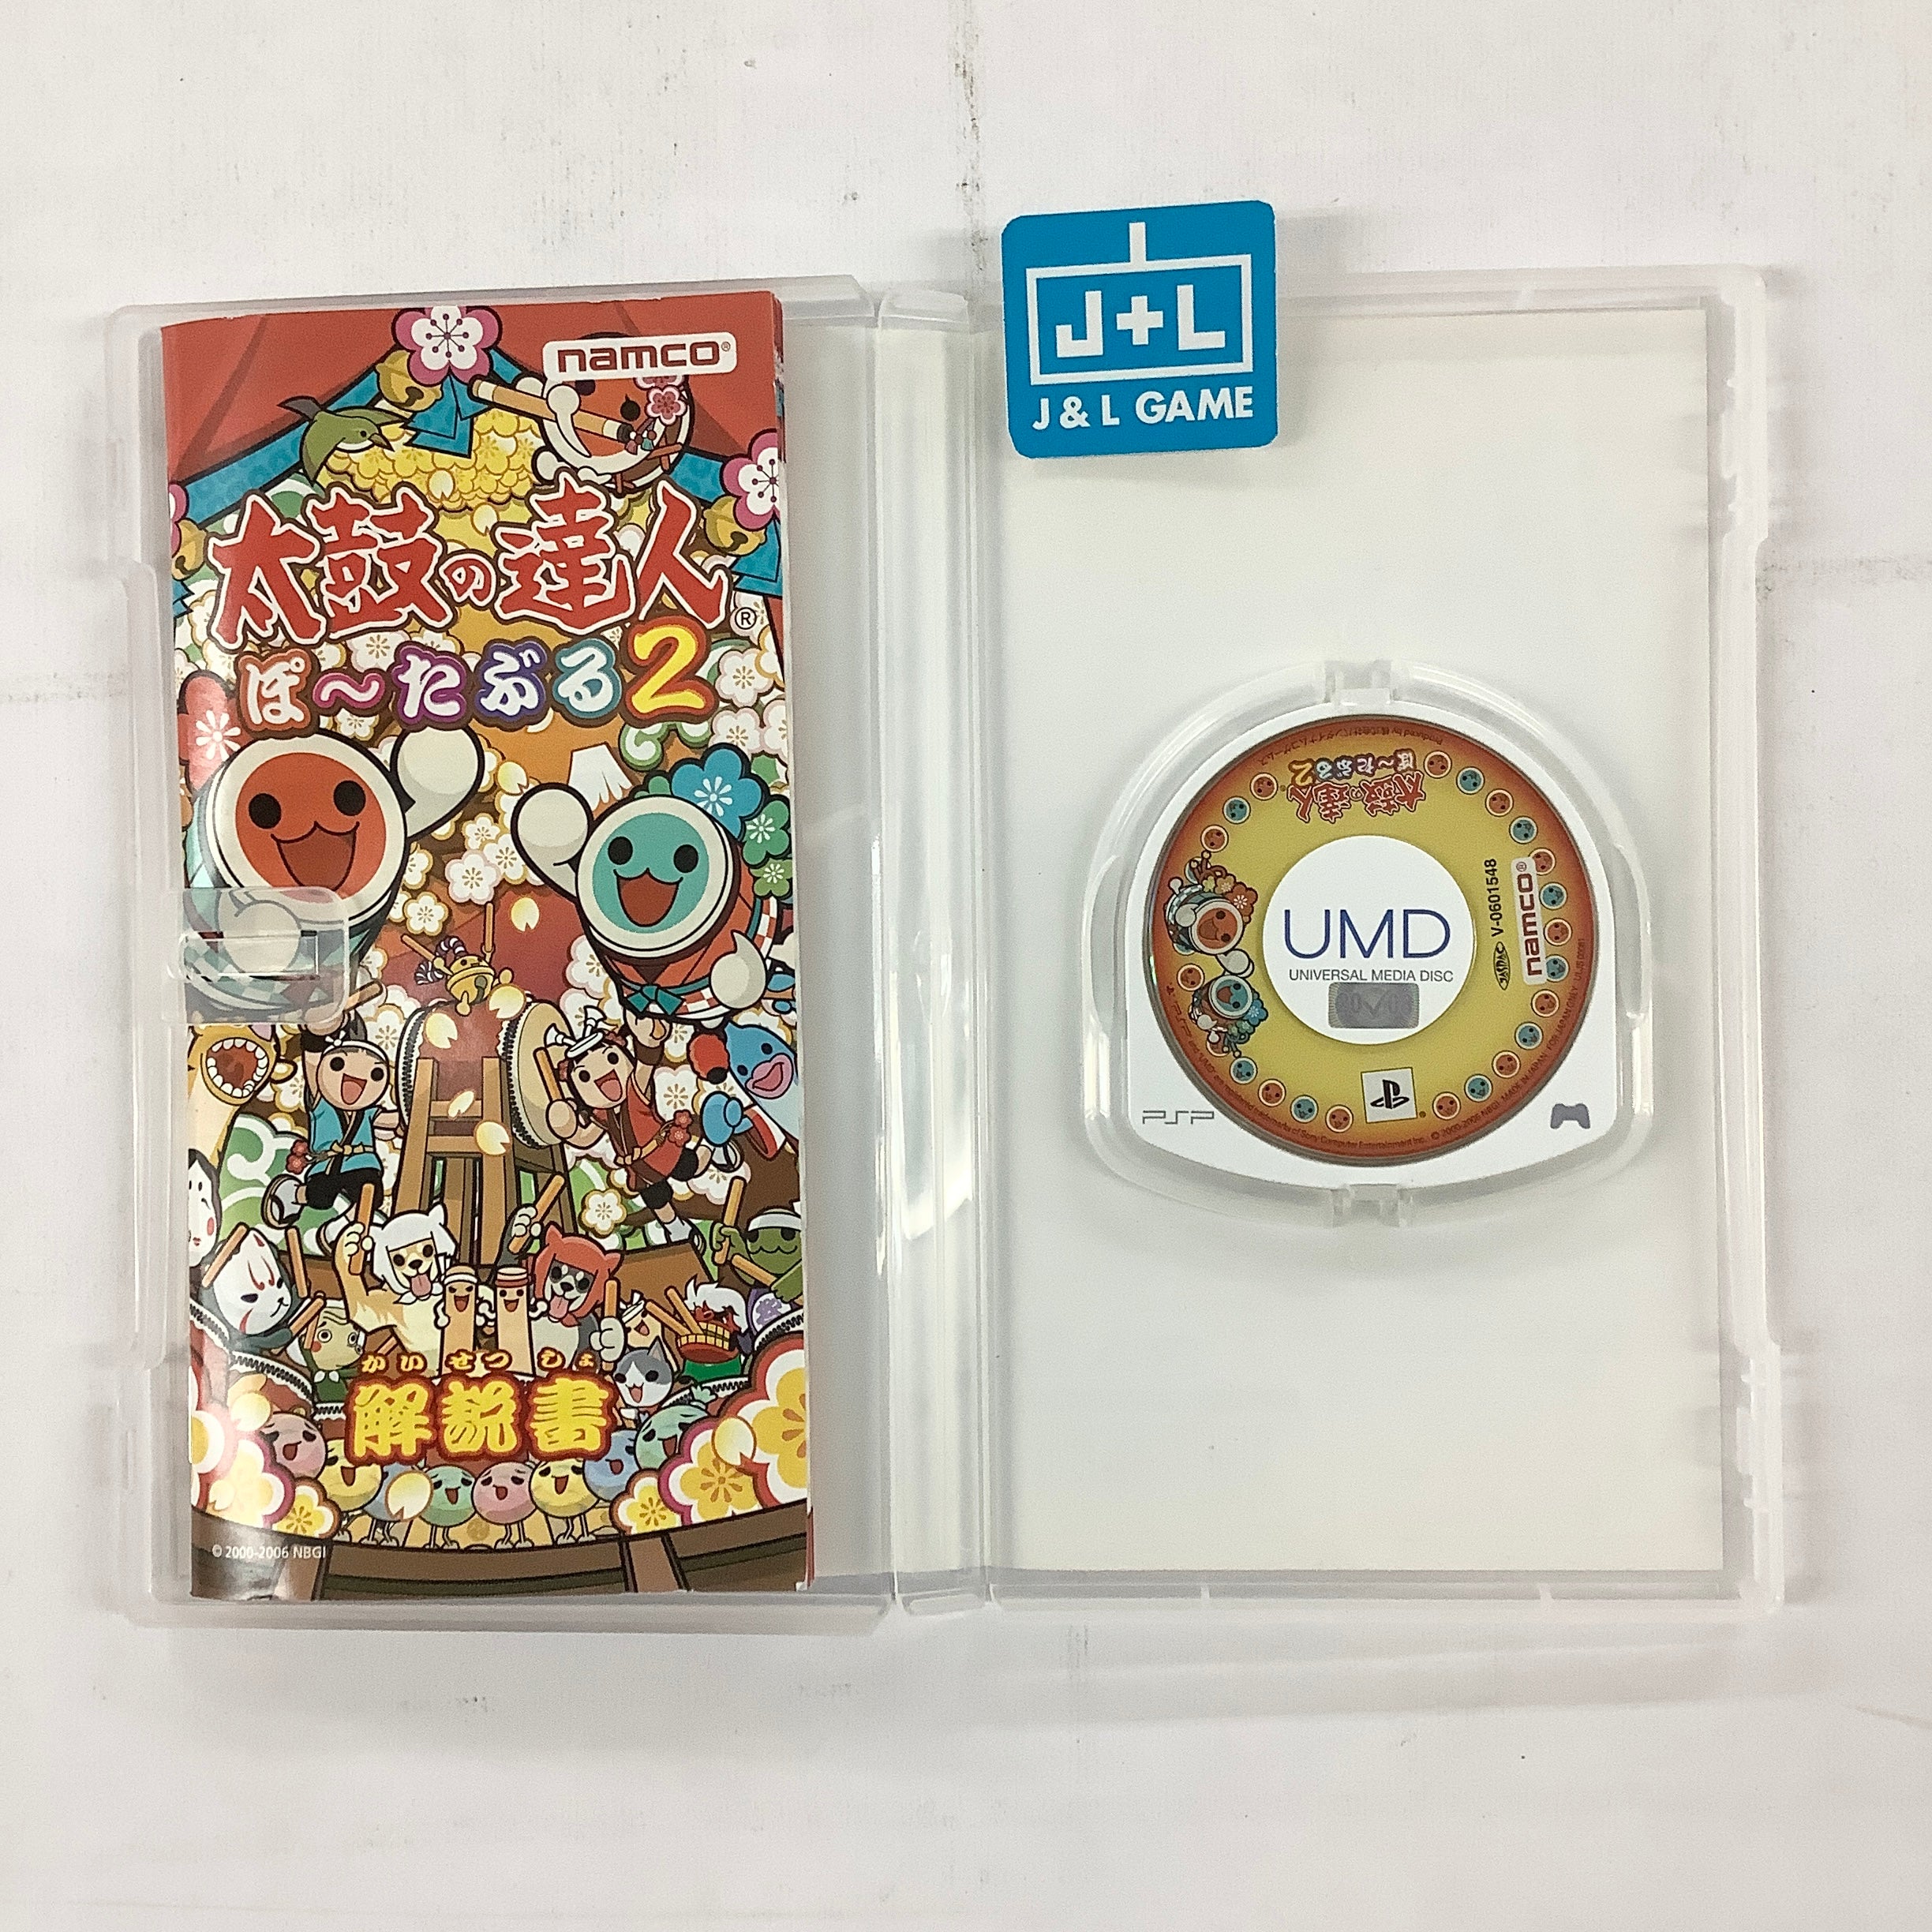 Taiko no Tatsujin Portable 2 - Sony PSP [Pre-Owned] (Japanese Import) Video Games NAMCO   